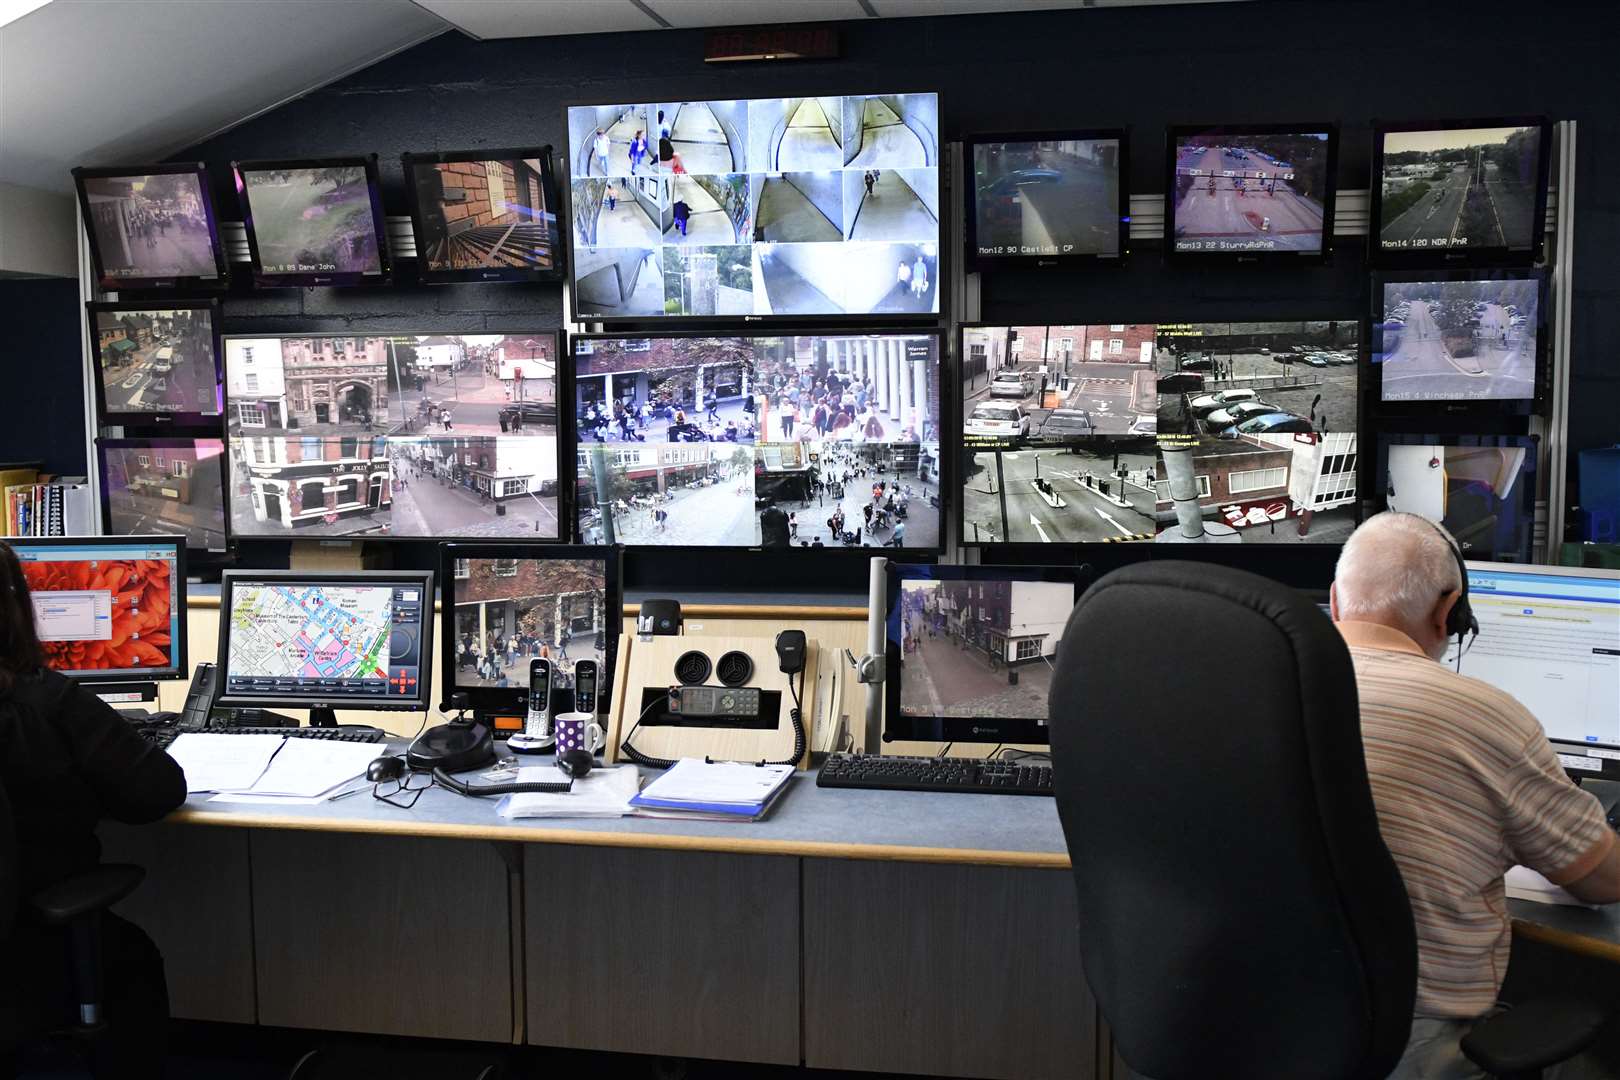 The cameras will be monitored in the council's control room